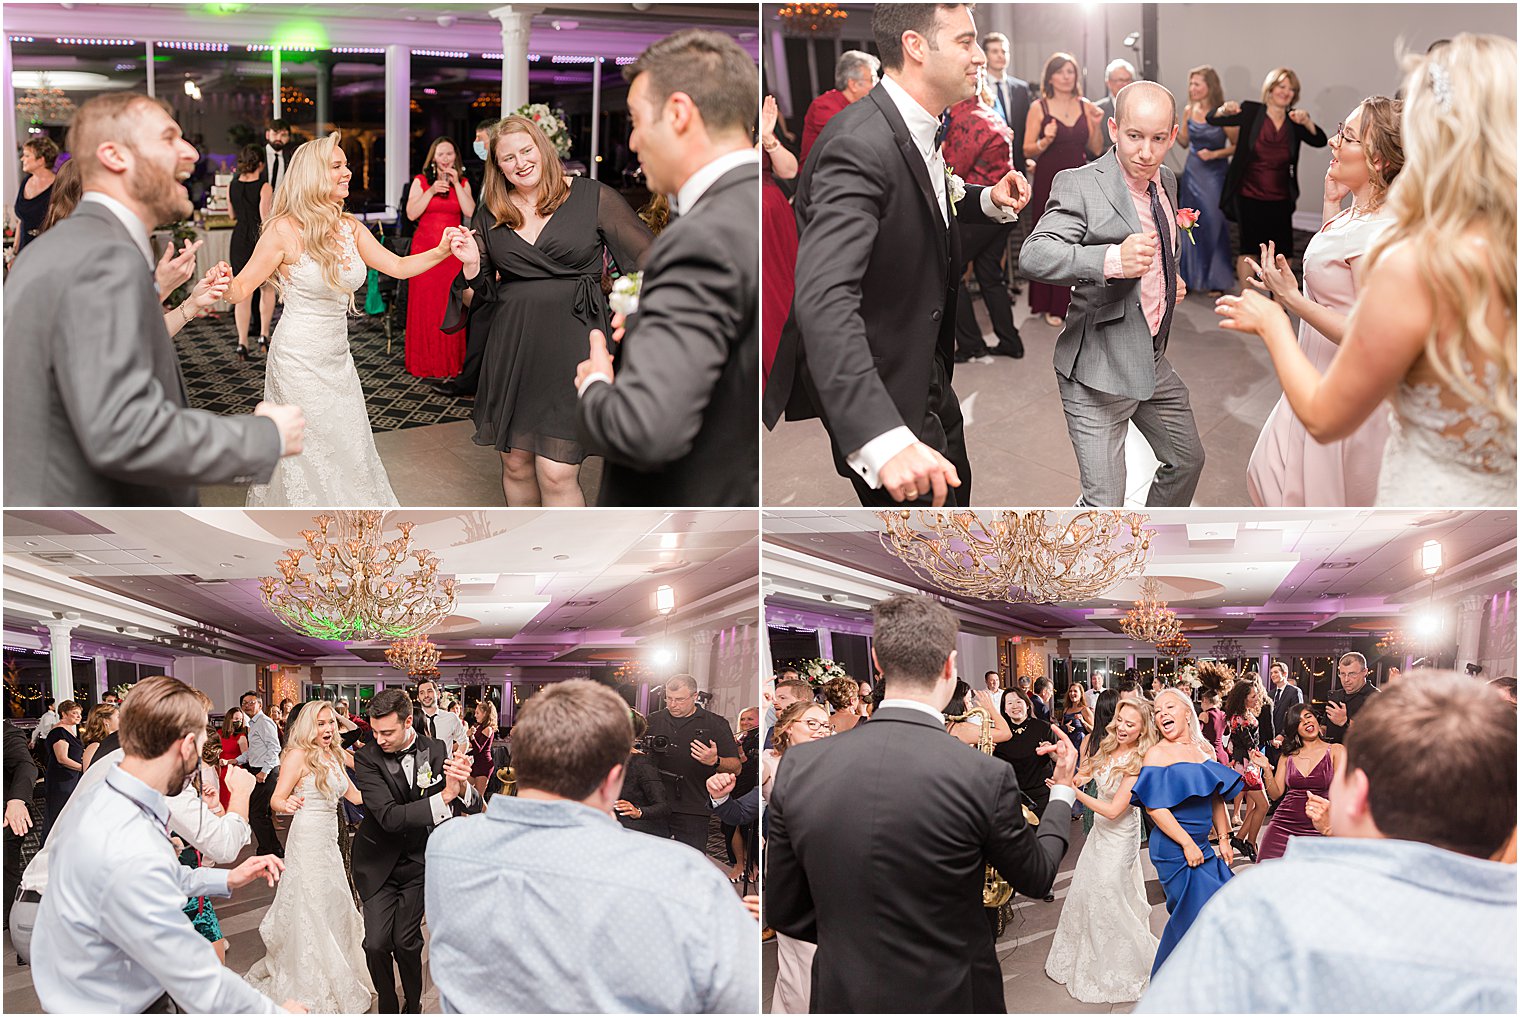 wedding guests dance with bride and groom during East Brunswick NJ wedding reception 